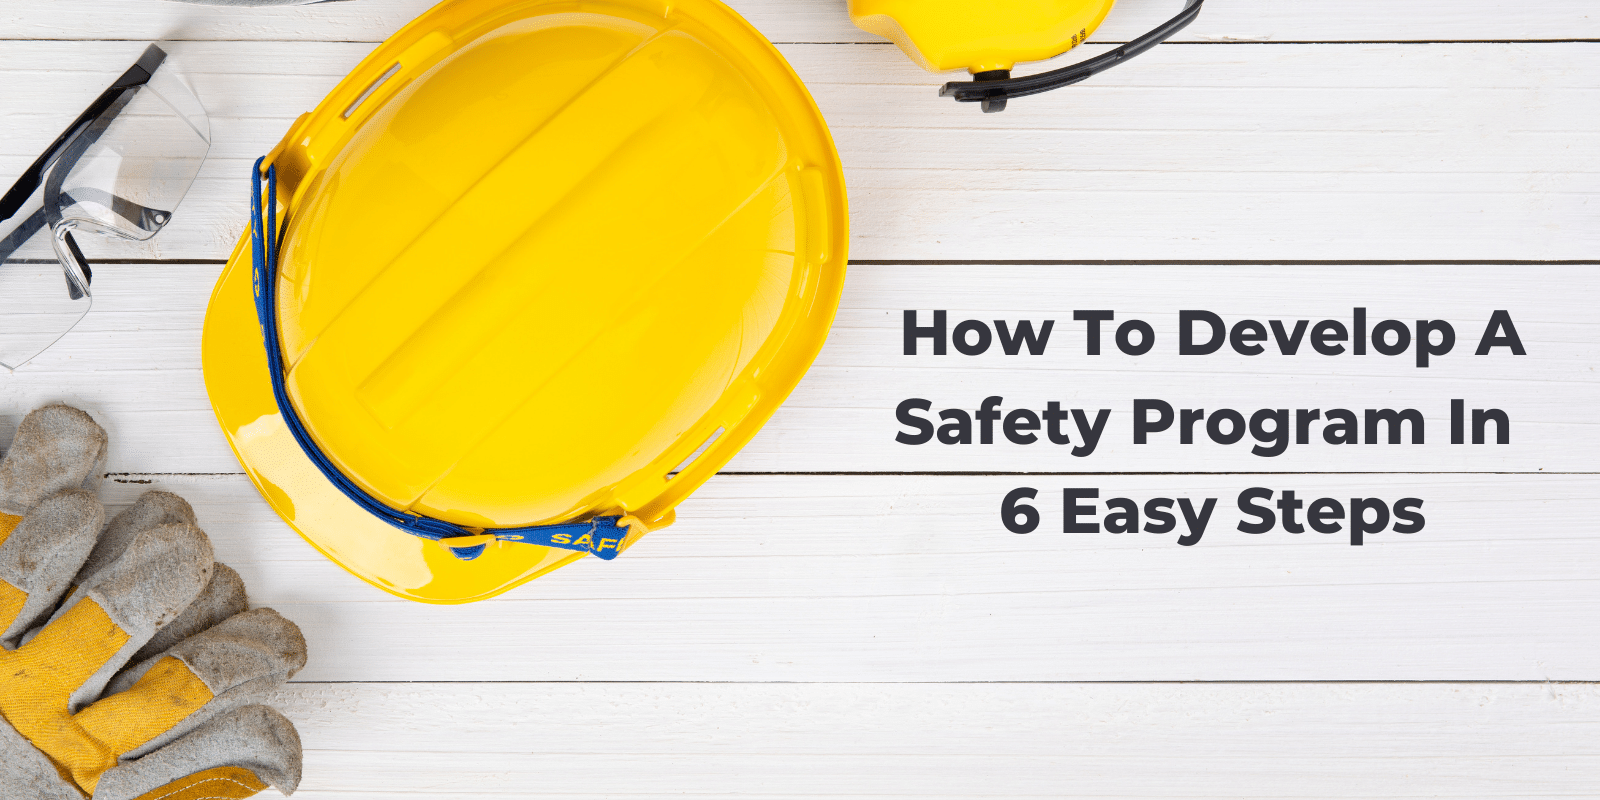 4 Ways To Enhance Job Safety Program For Roofing Business